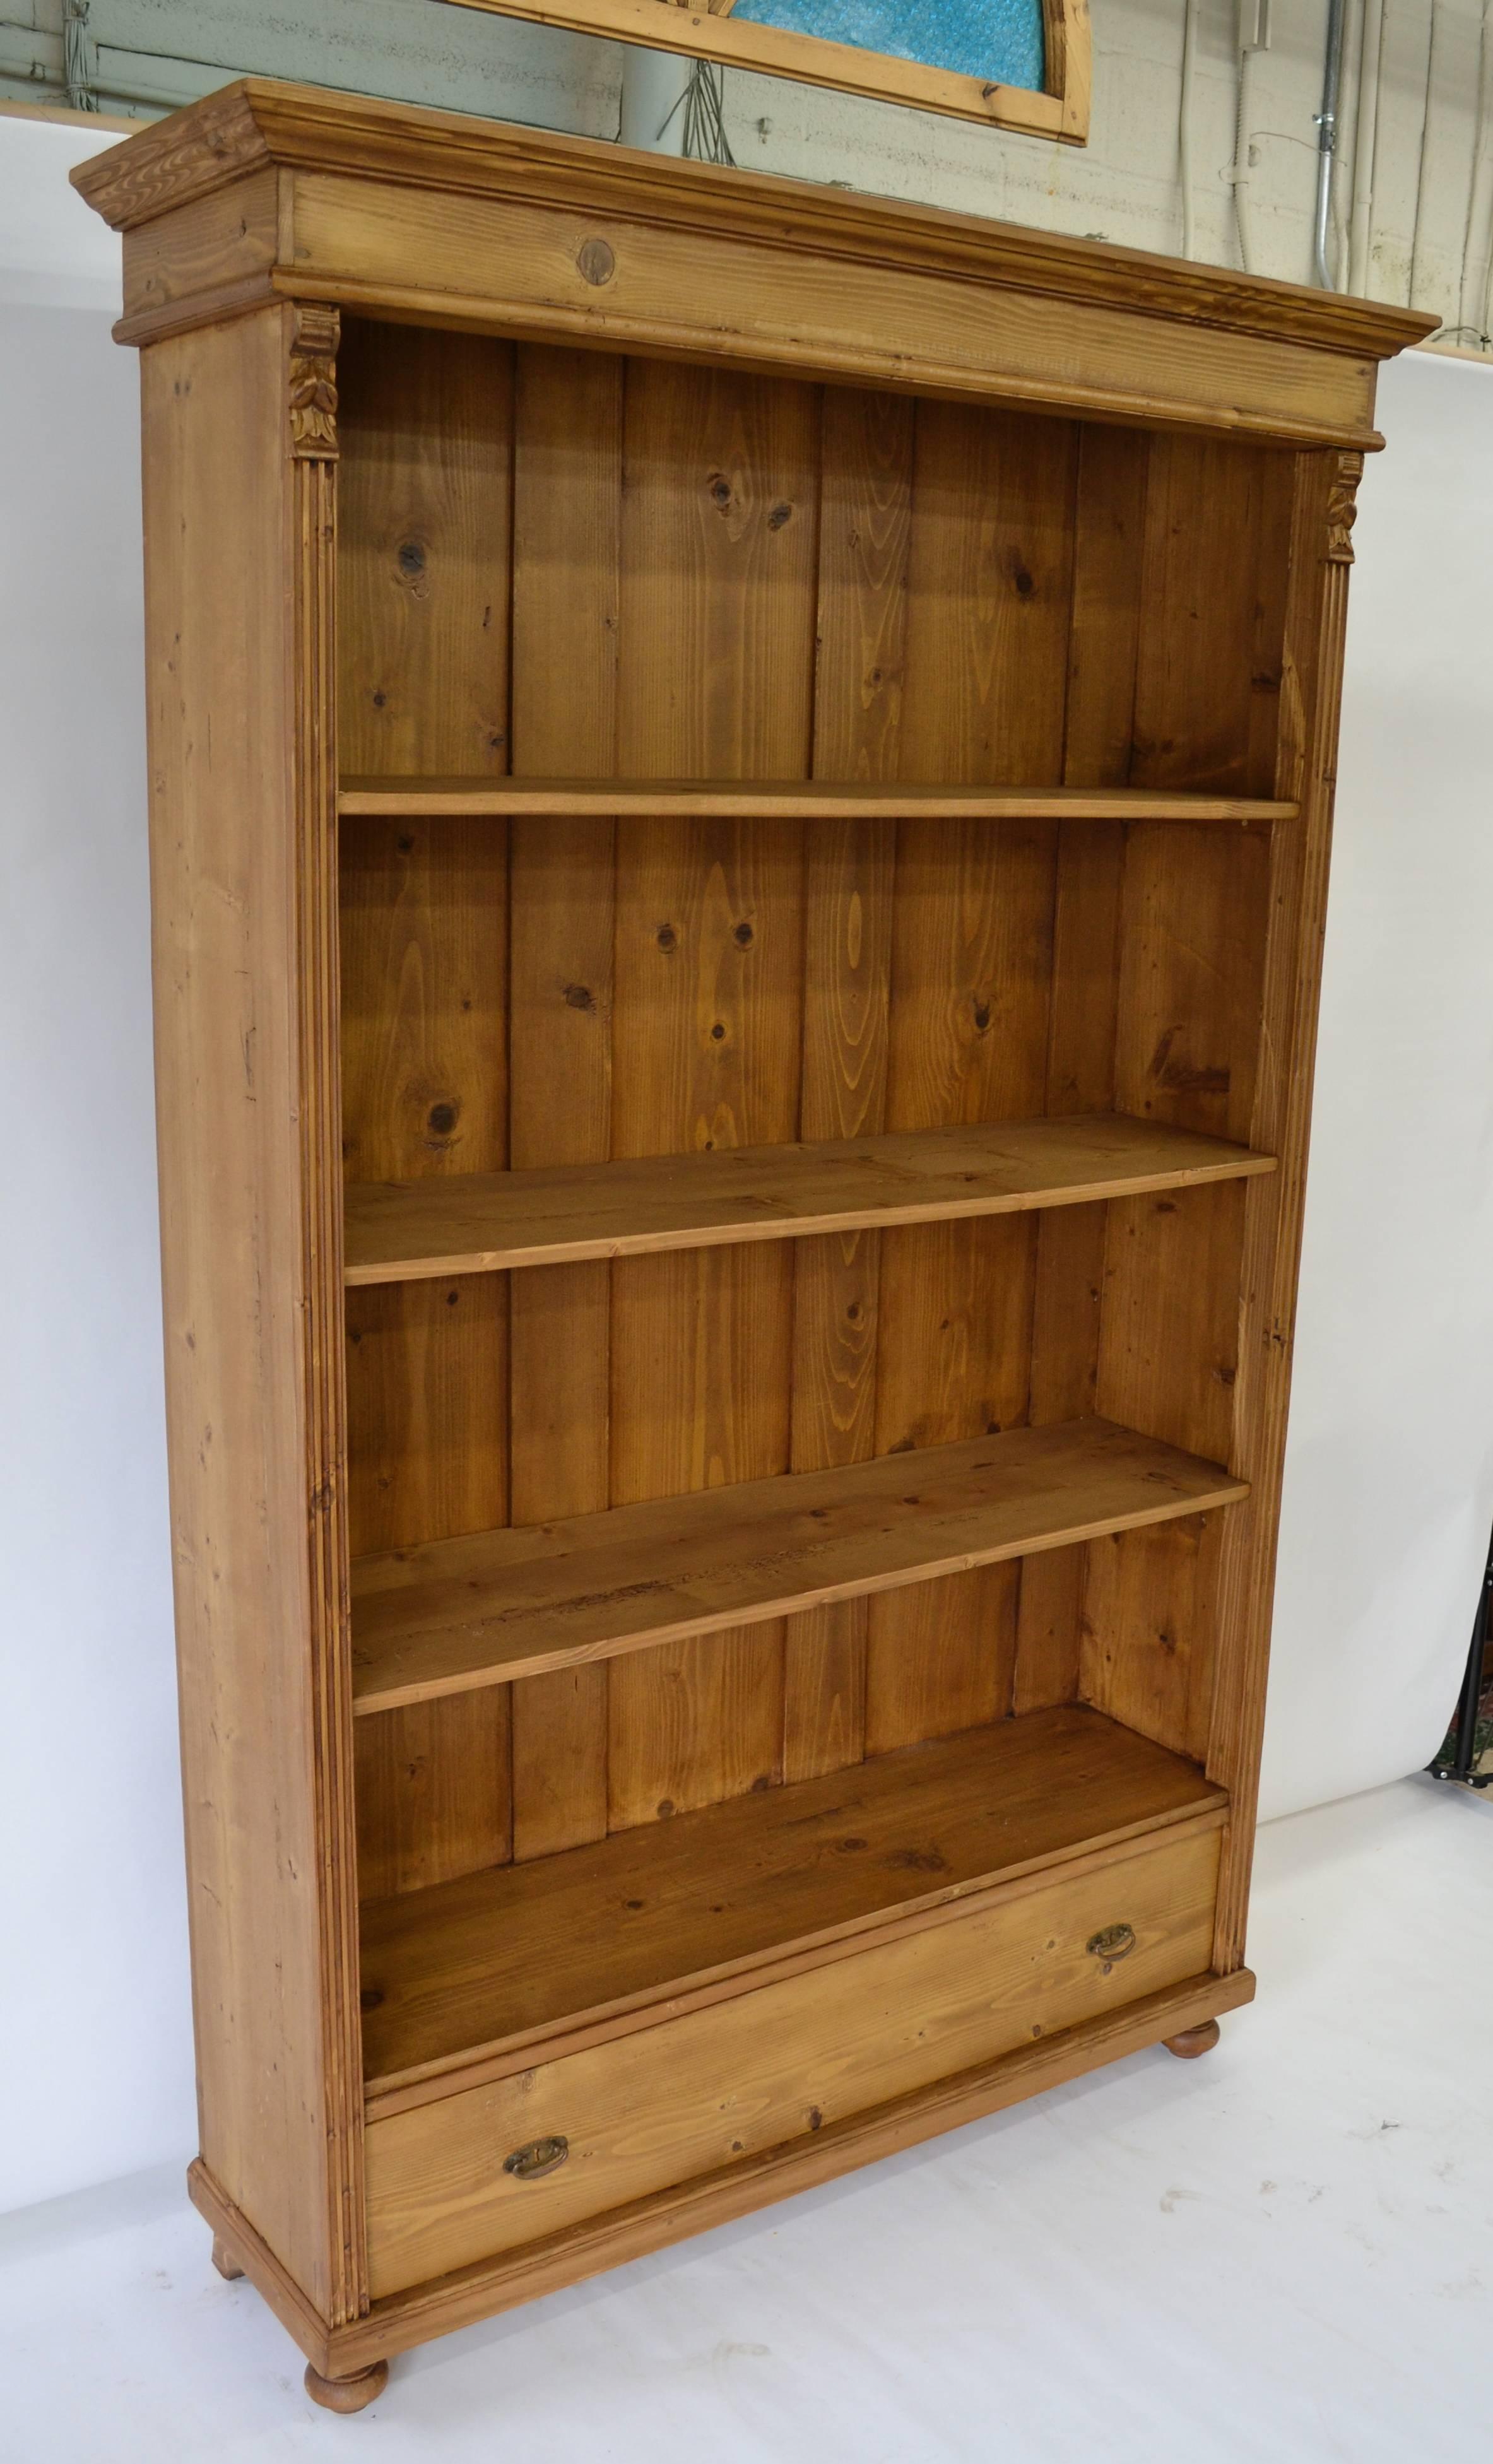 A vintage armoire that lost its doors provided the shell of this bookcase, with one side board removed to reduce the depth. All the old features and the deep rich color remain.